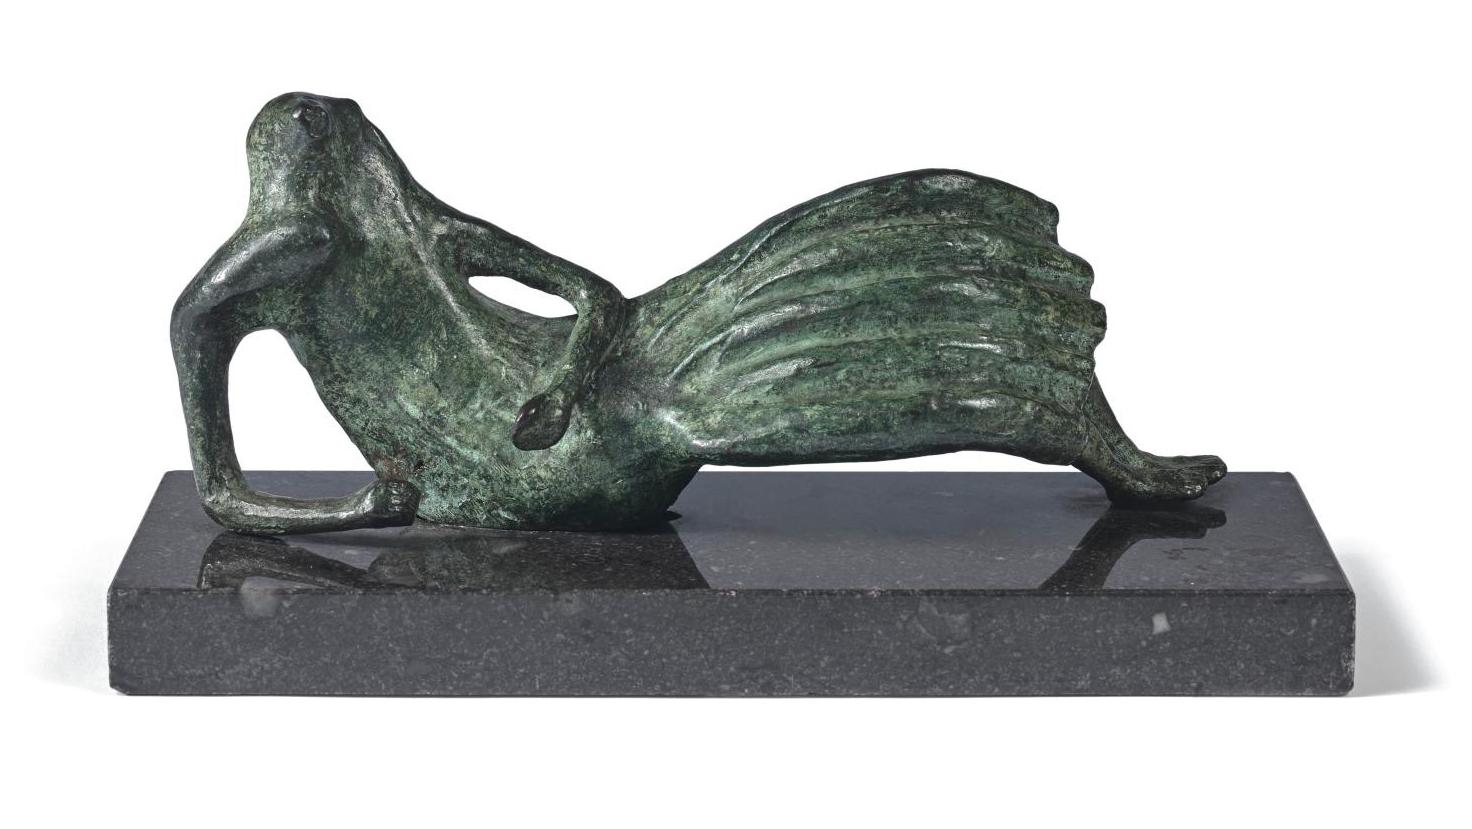 Henry Moore (1898-1986), Reclining Figure No. 5, 1952, bronze with a green patina,... The Estate Sale of Sylvie Guerlain Includes Works by Moore and Leonor Fini